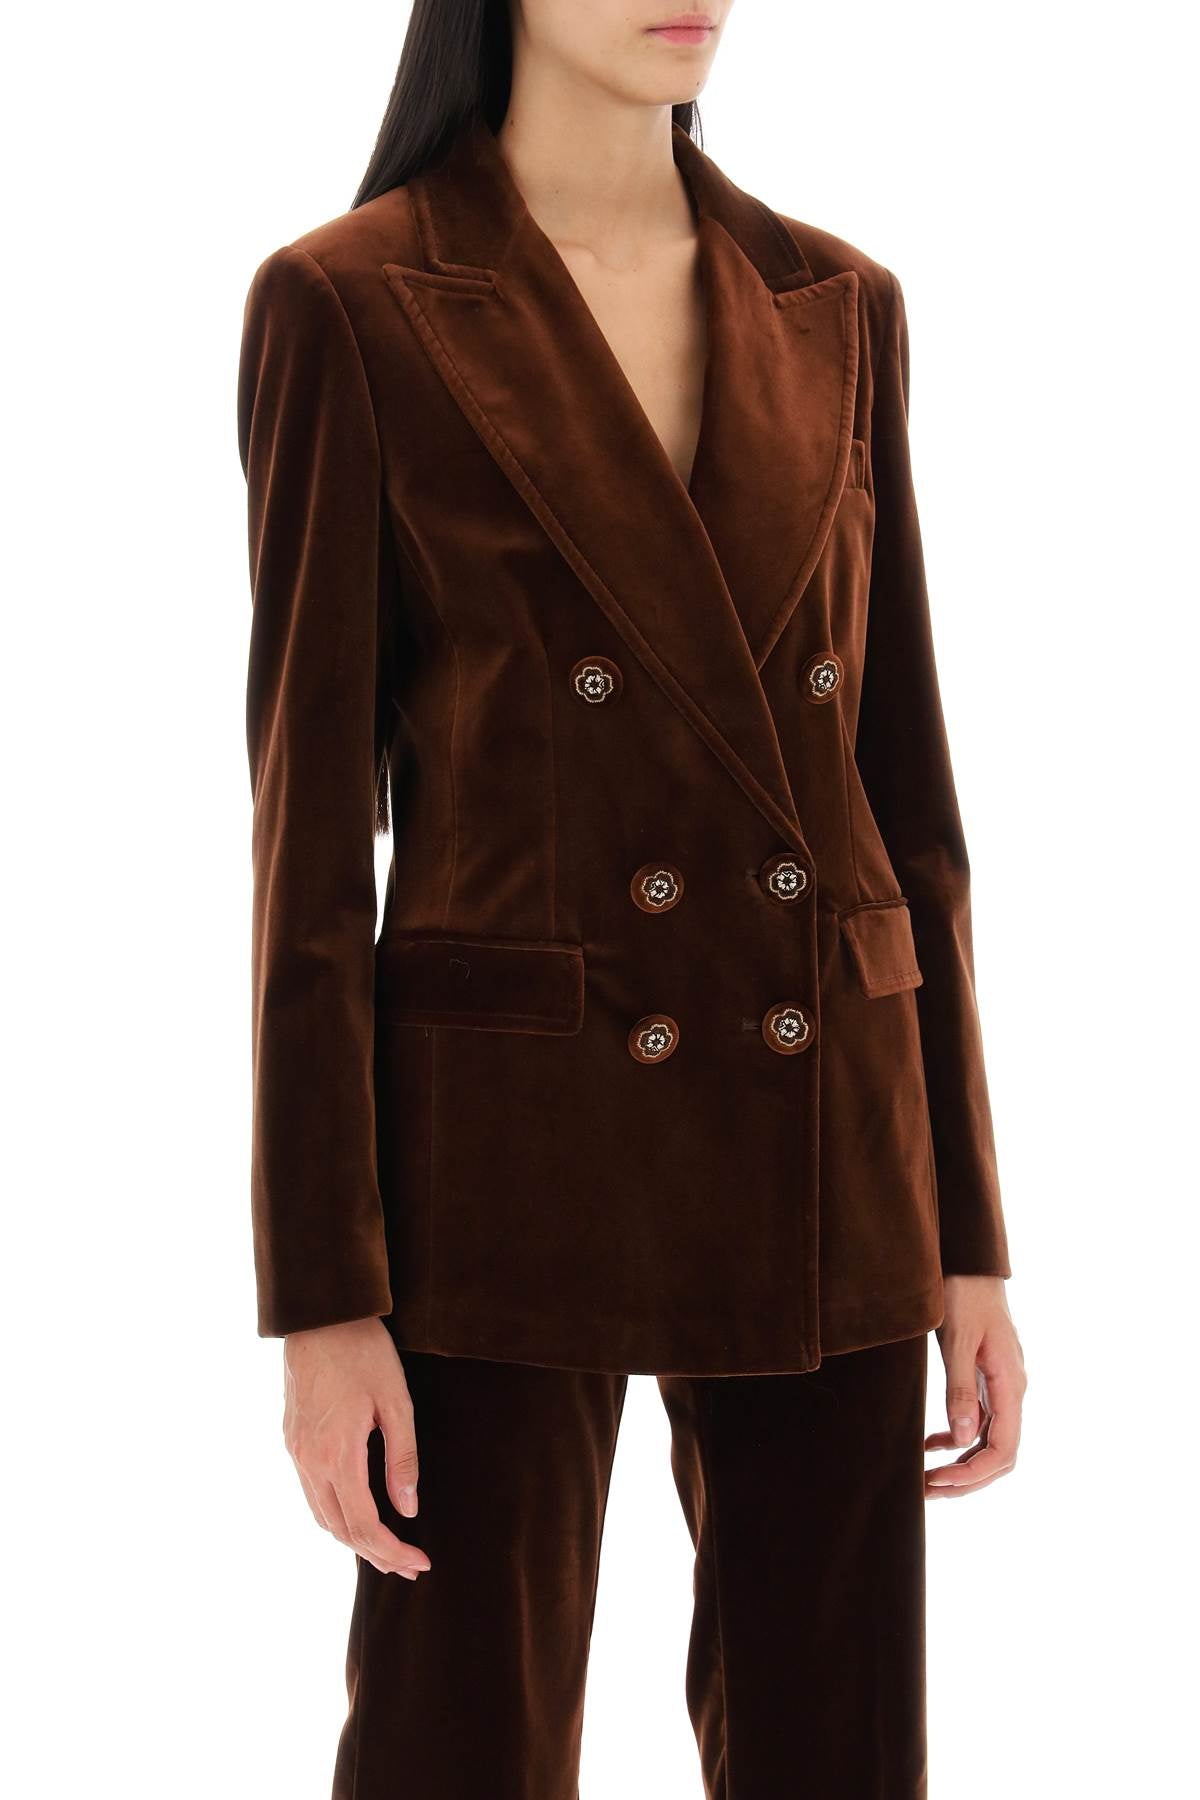 Shop Etro Women's Brown Velvet Jacket With Floral Embroidered Buttons And Deconstructed Design